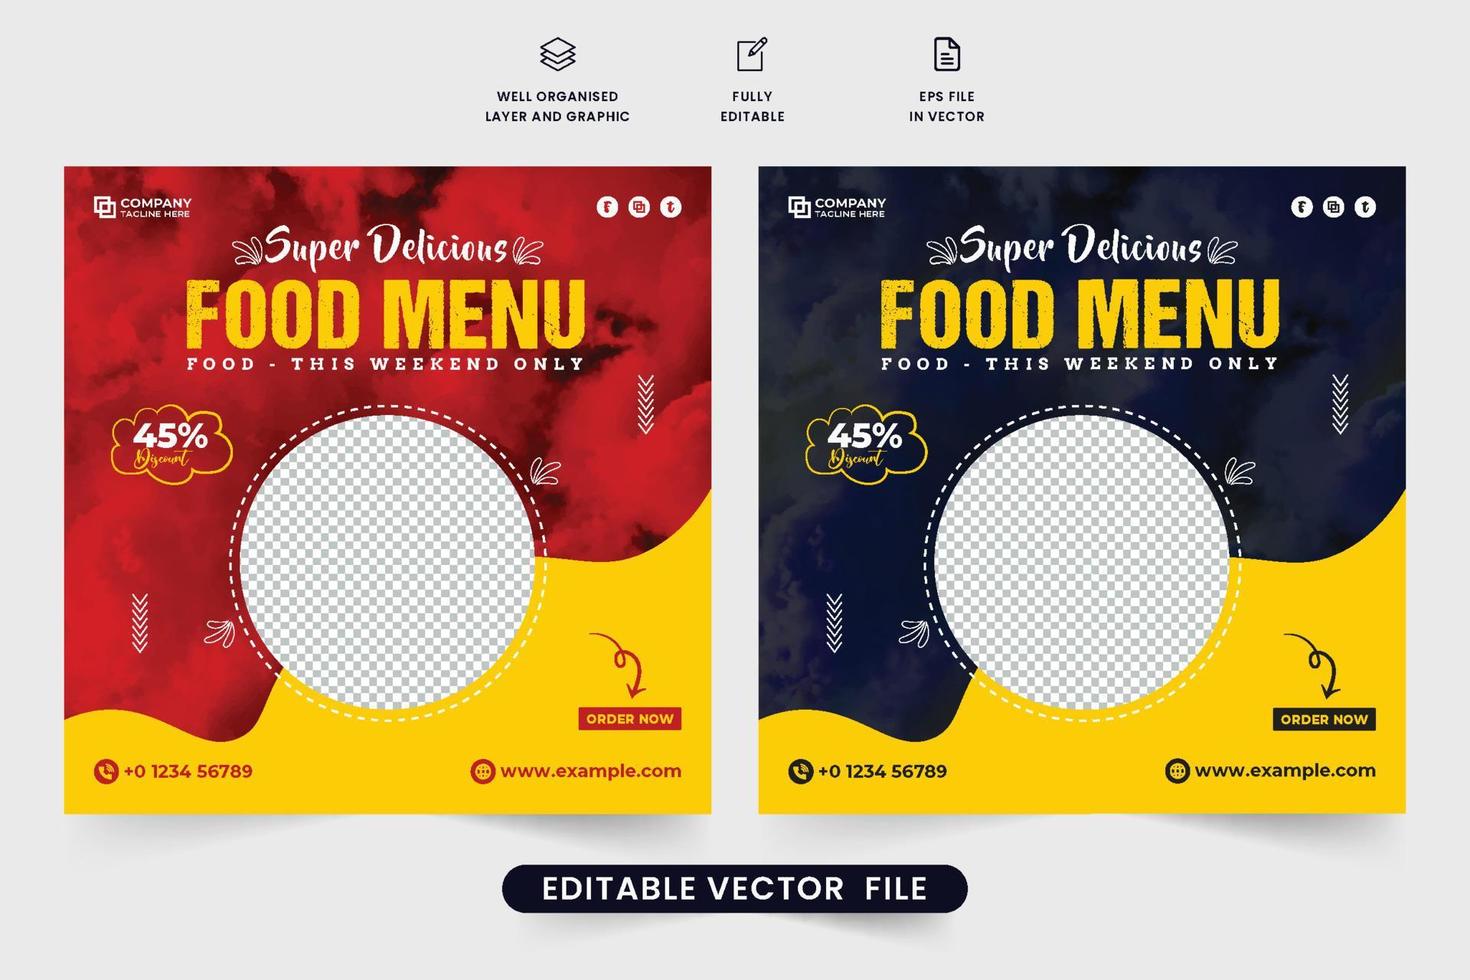 Delicious food menu social media post vector with red and yellow colors. Restaurant food promotional template design with abstract shapes. Restaurant business digital marketing web banner.